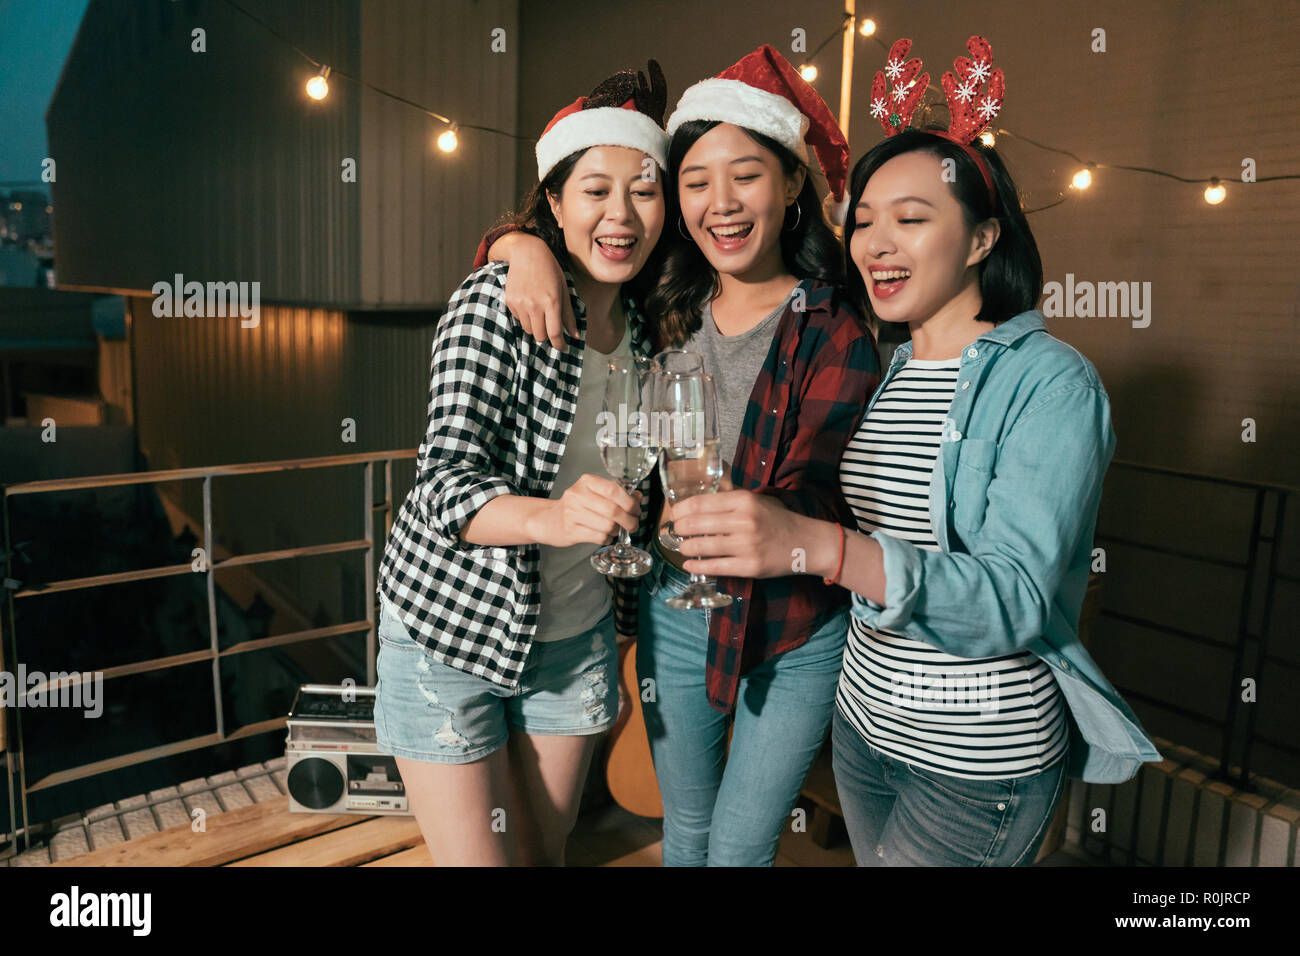 dark night christmas party outdoor. cheerful ladies with santa hats cheers champagne on balcony in xmas eve. young asian girls celebrate with music. Stock Photo